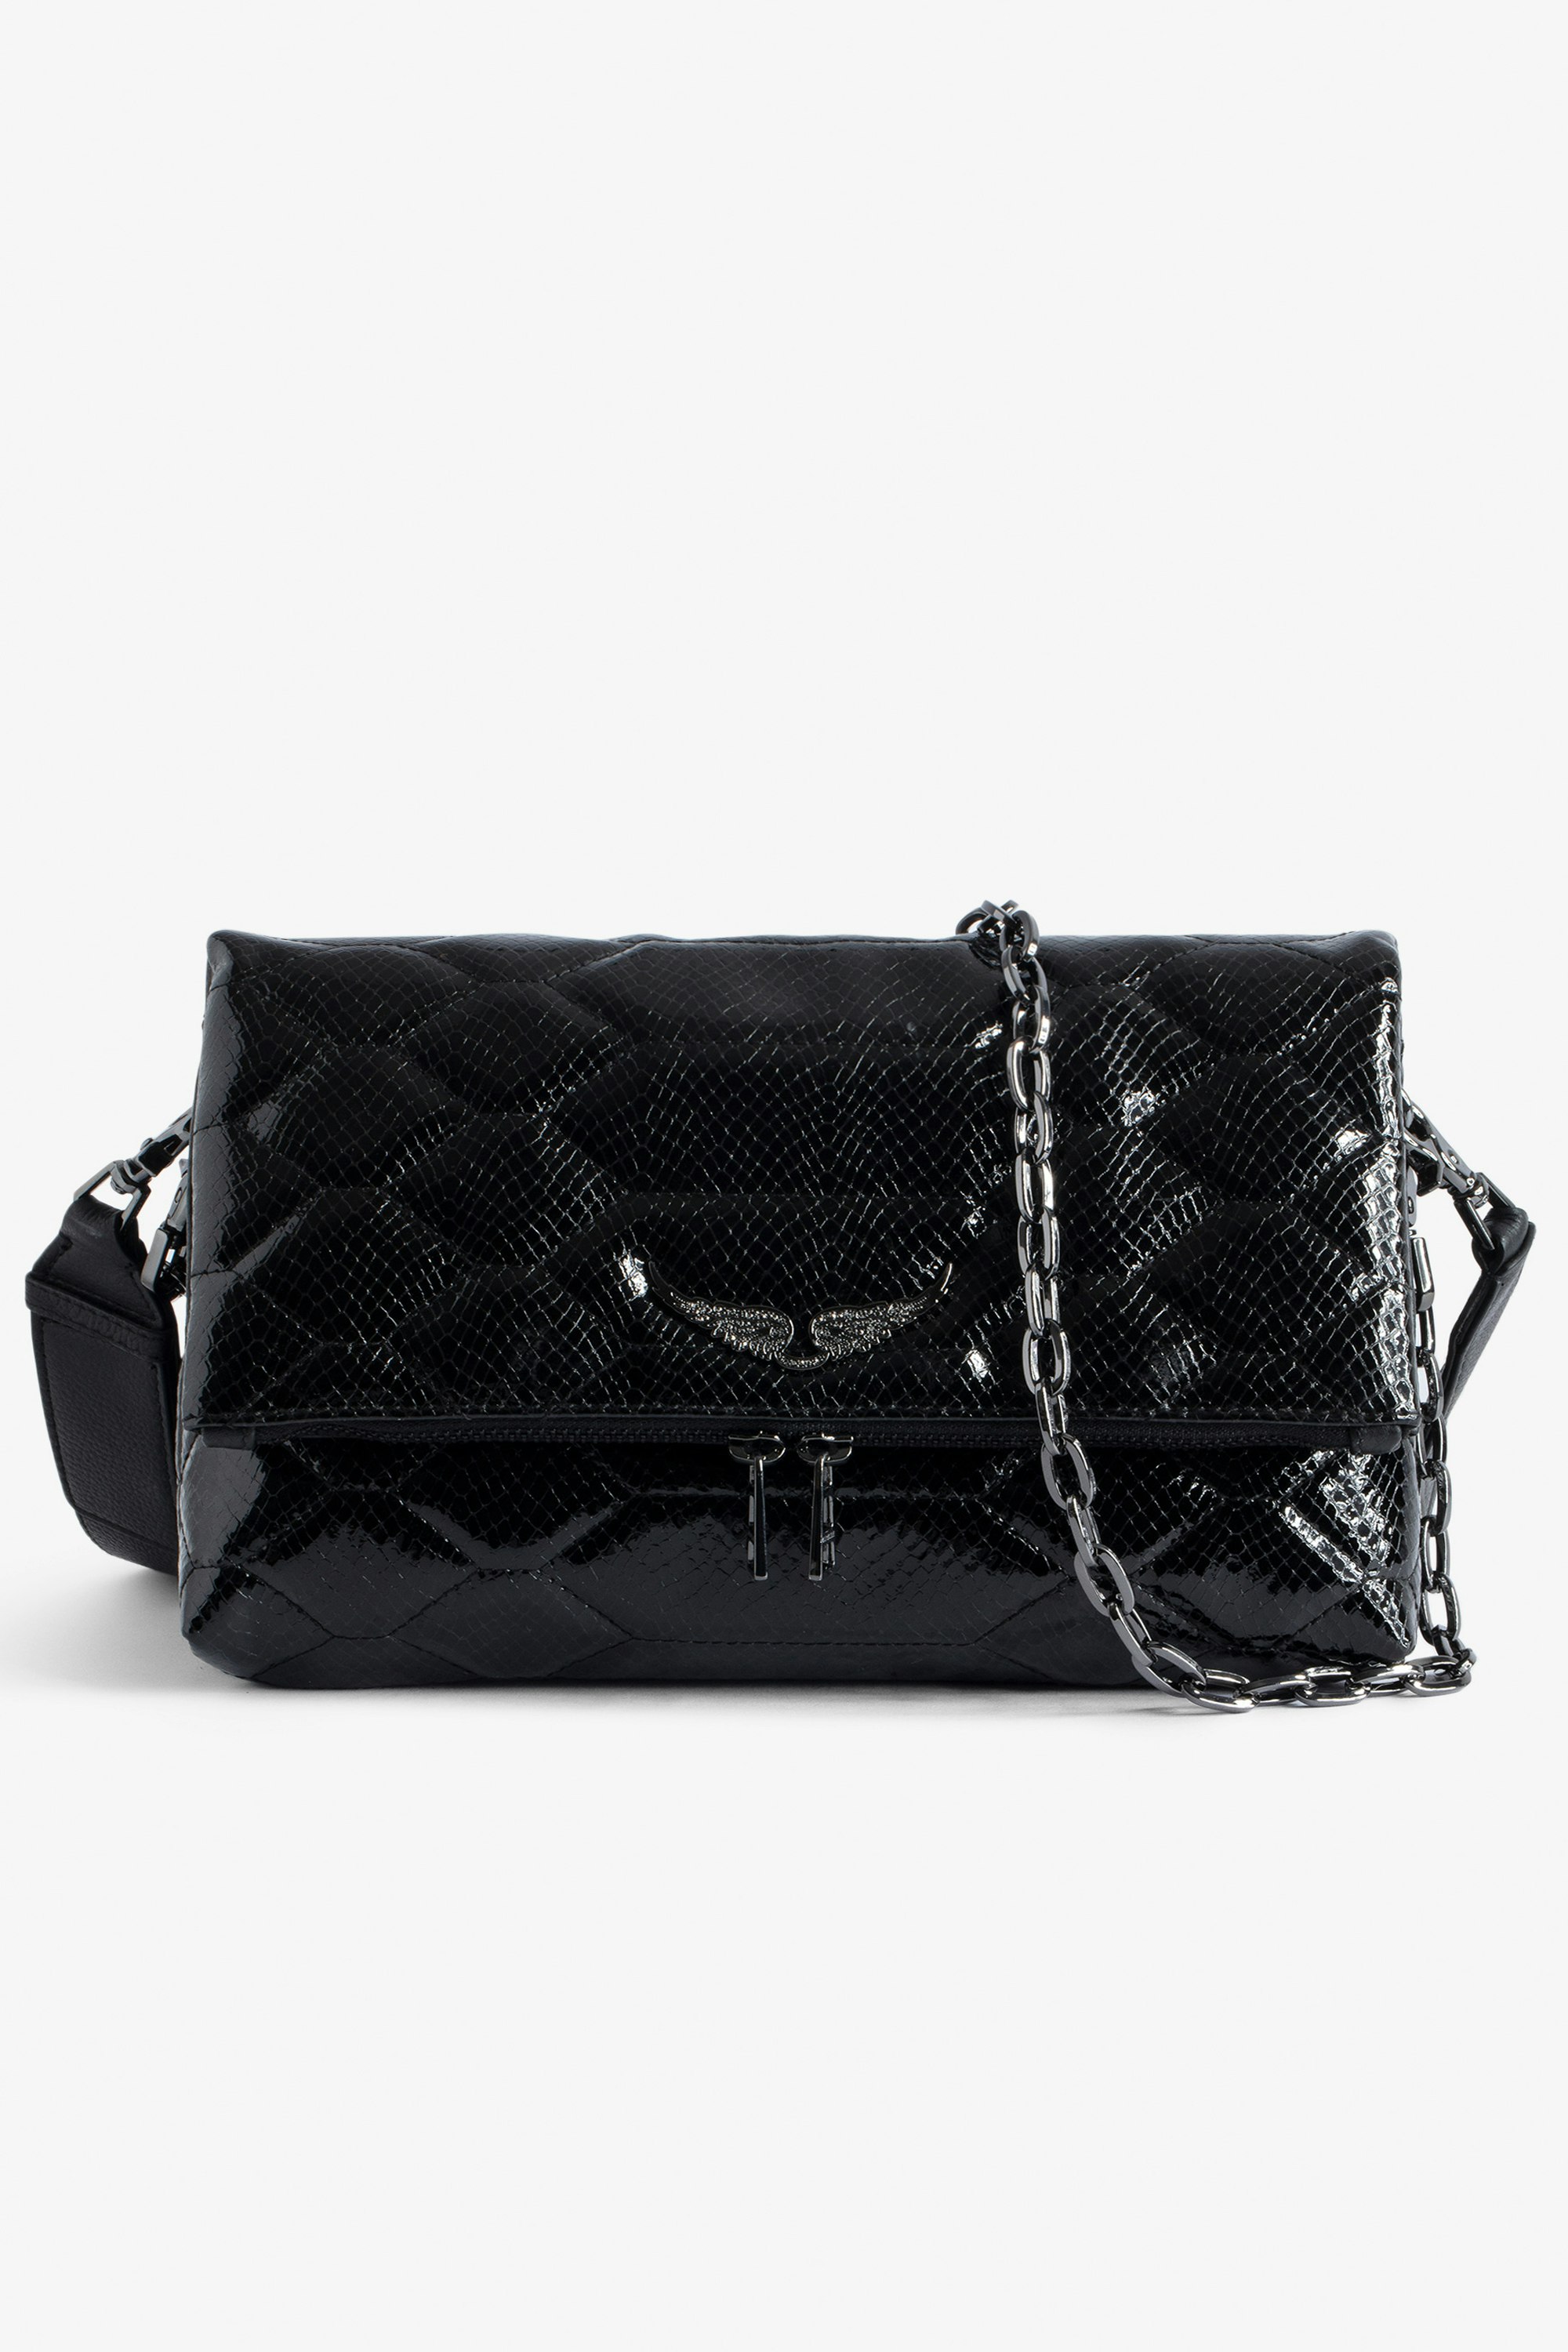 Rocky Glossy Wild Quilted Bag - Women’s black quilted python-effect patent leather bag with shoulder strap and chain.